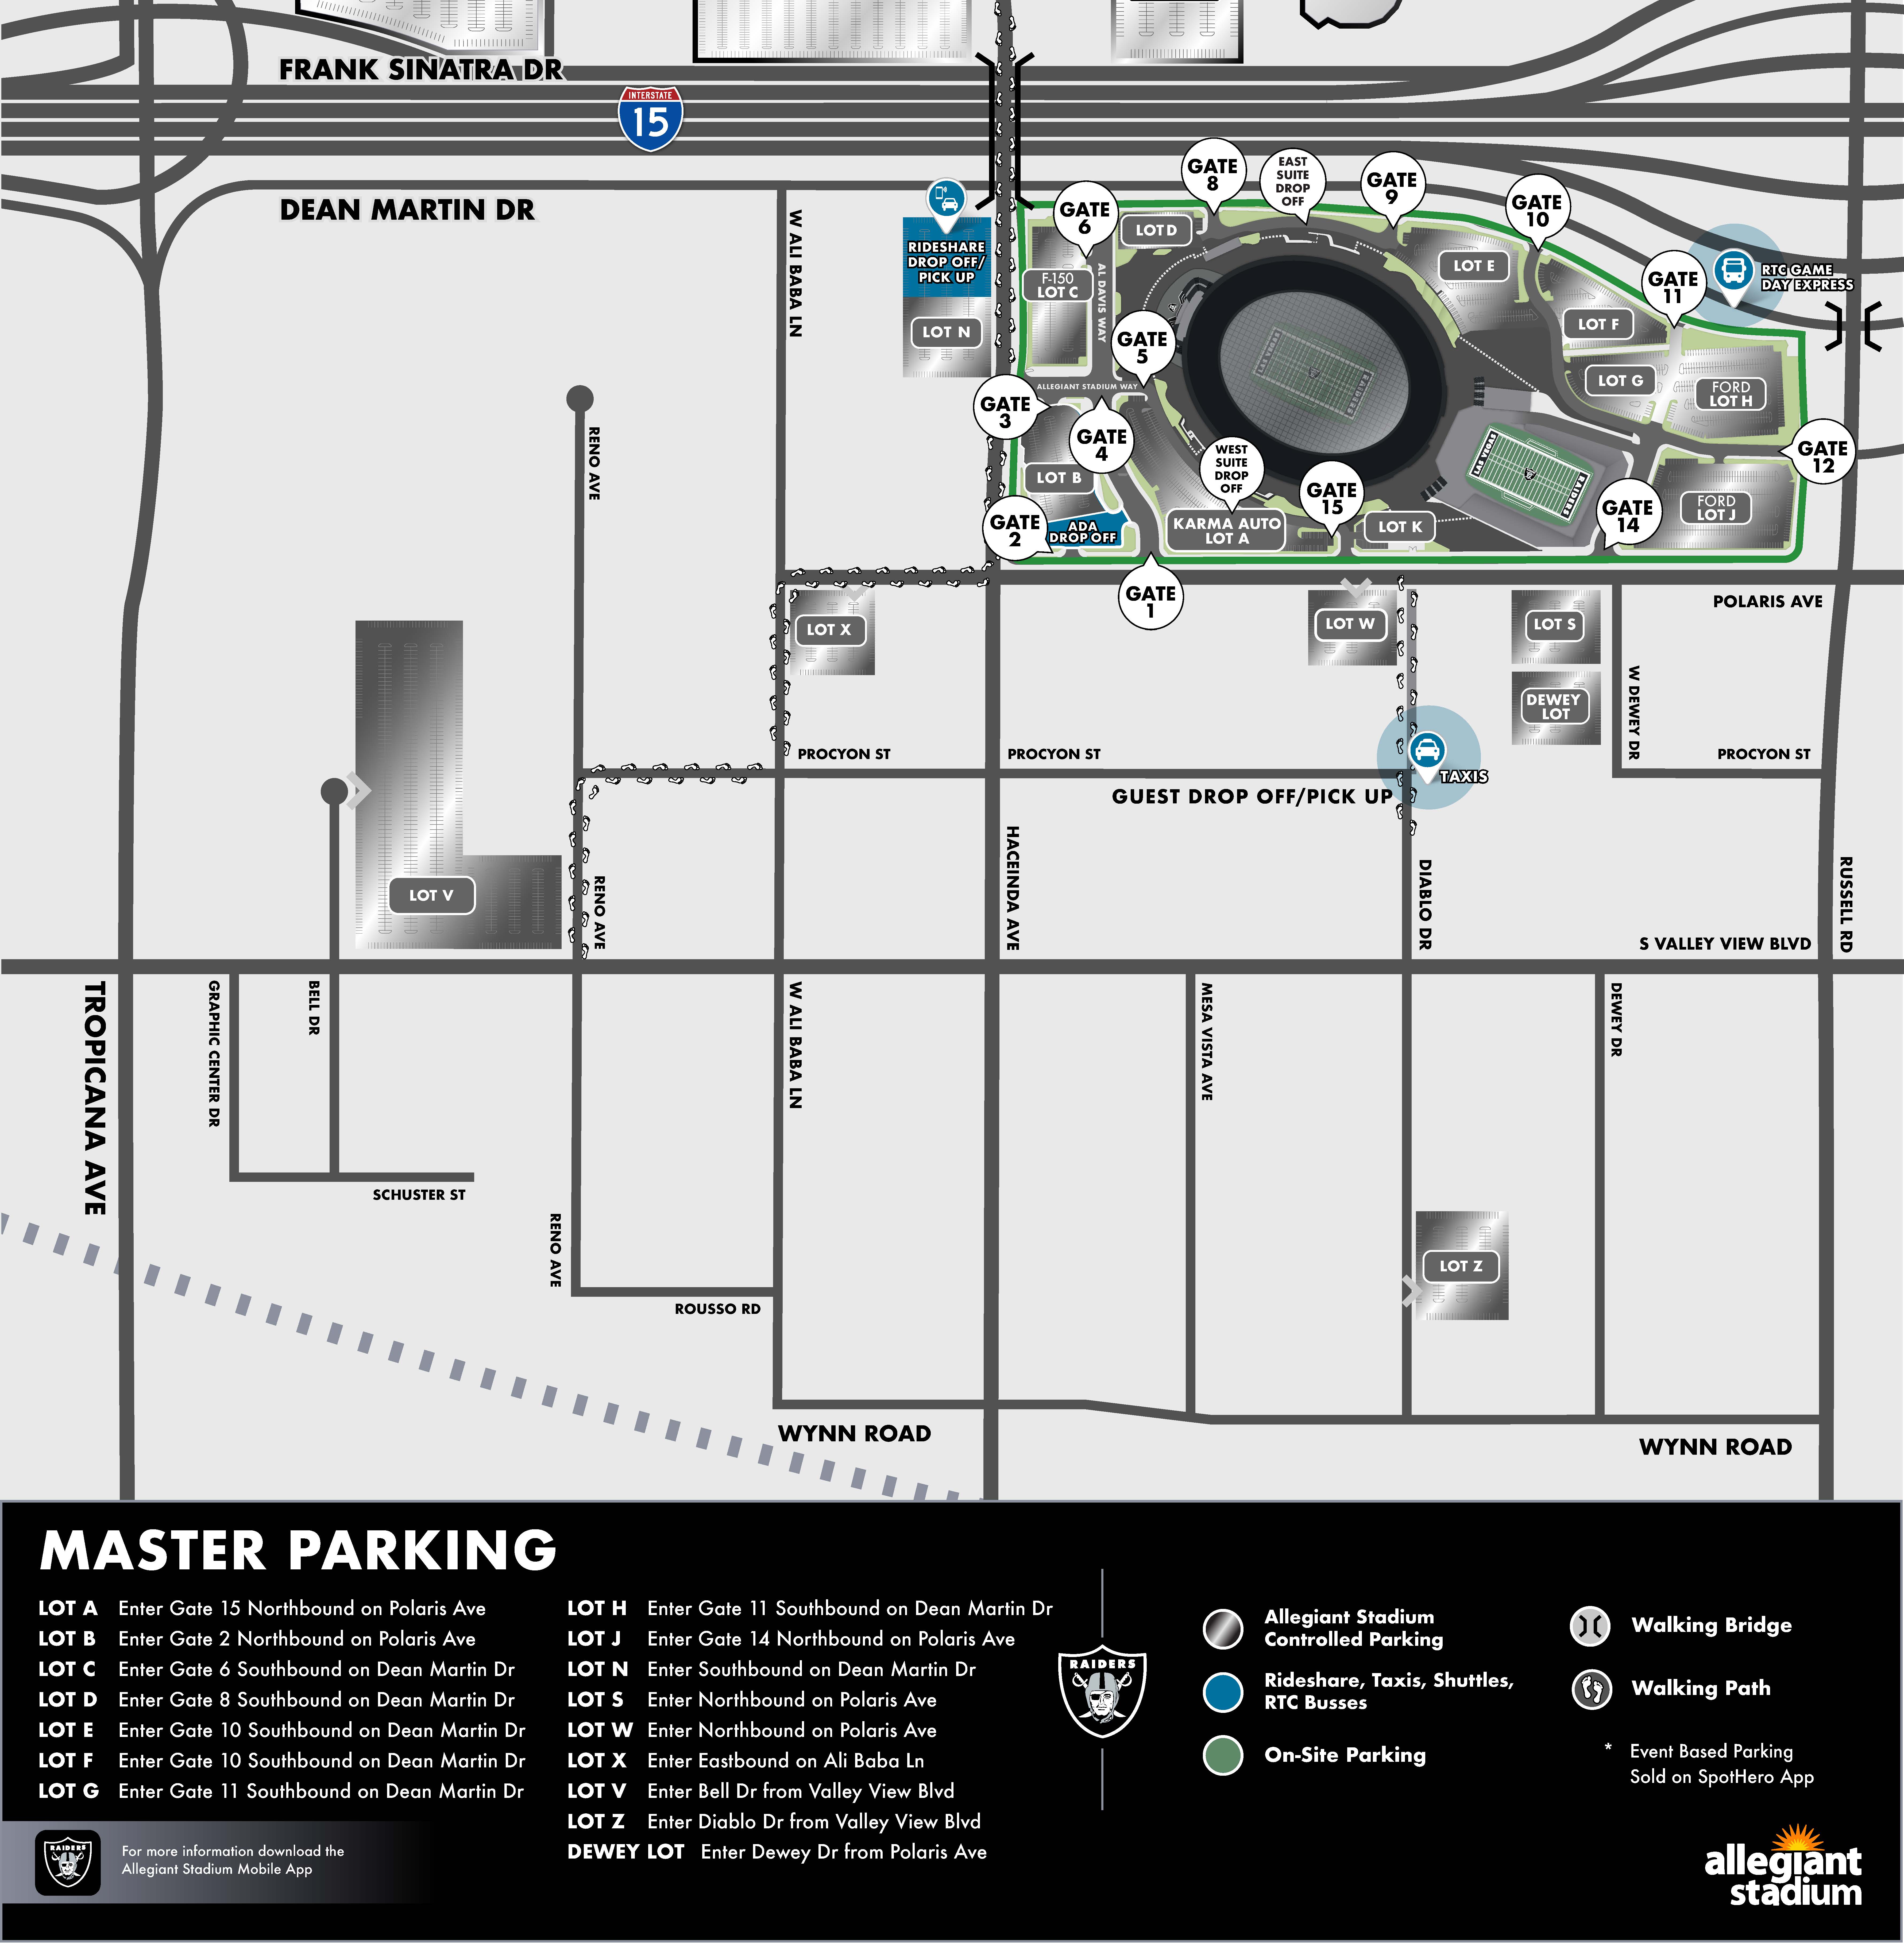 Opening Day parking and directions